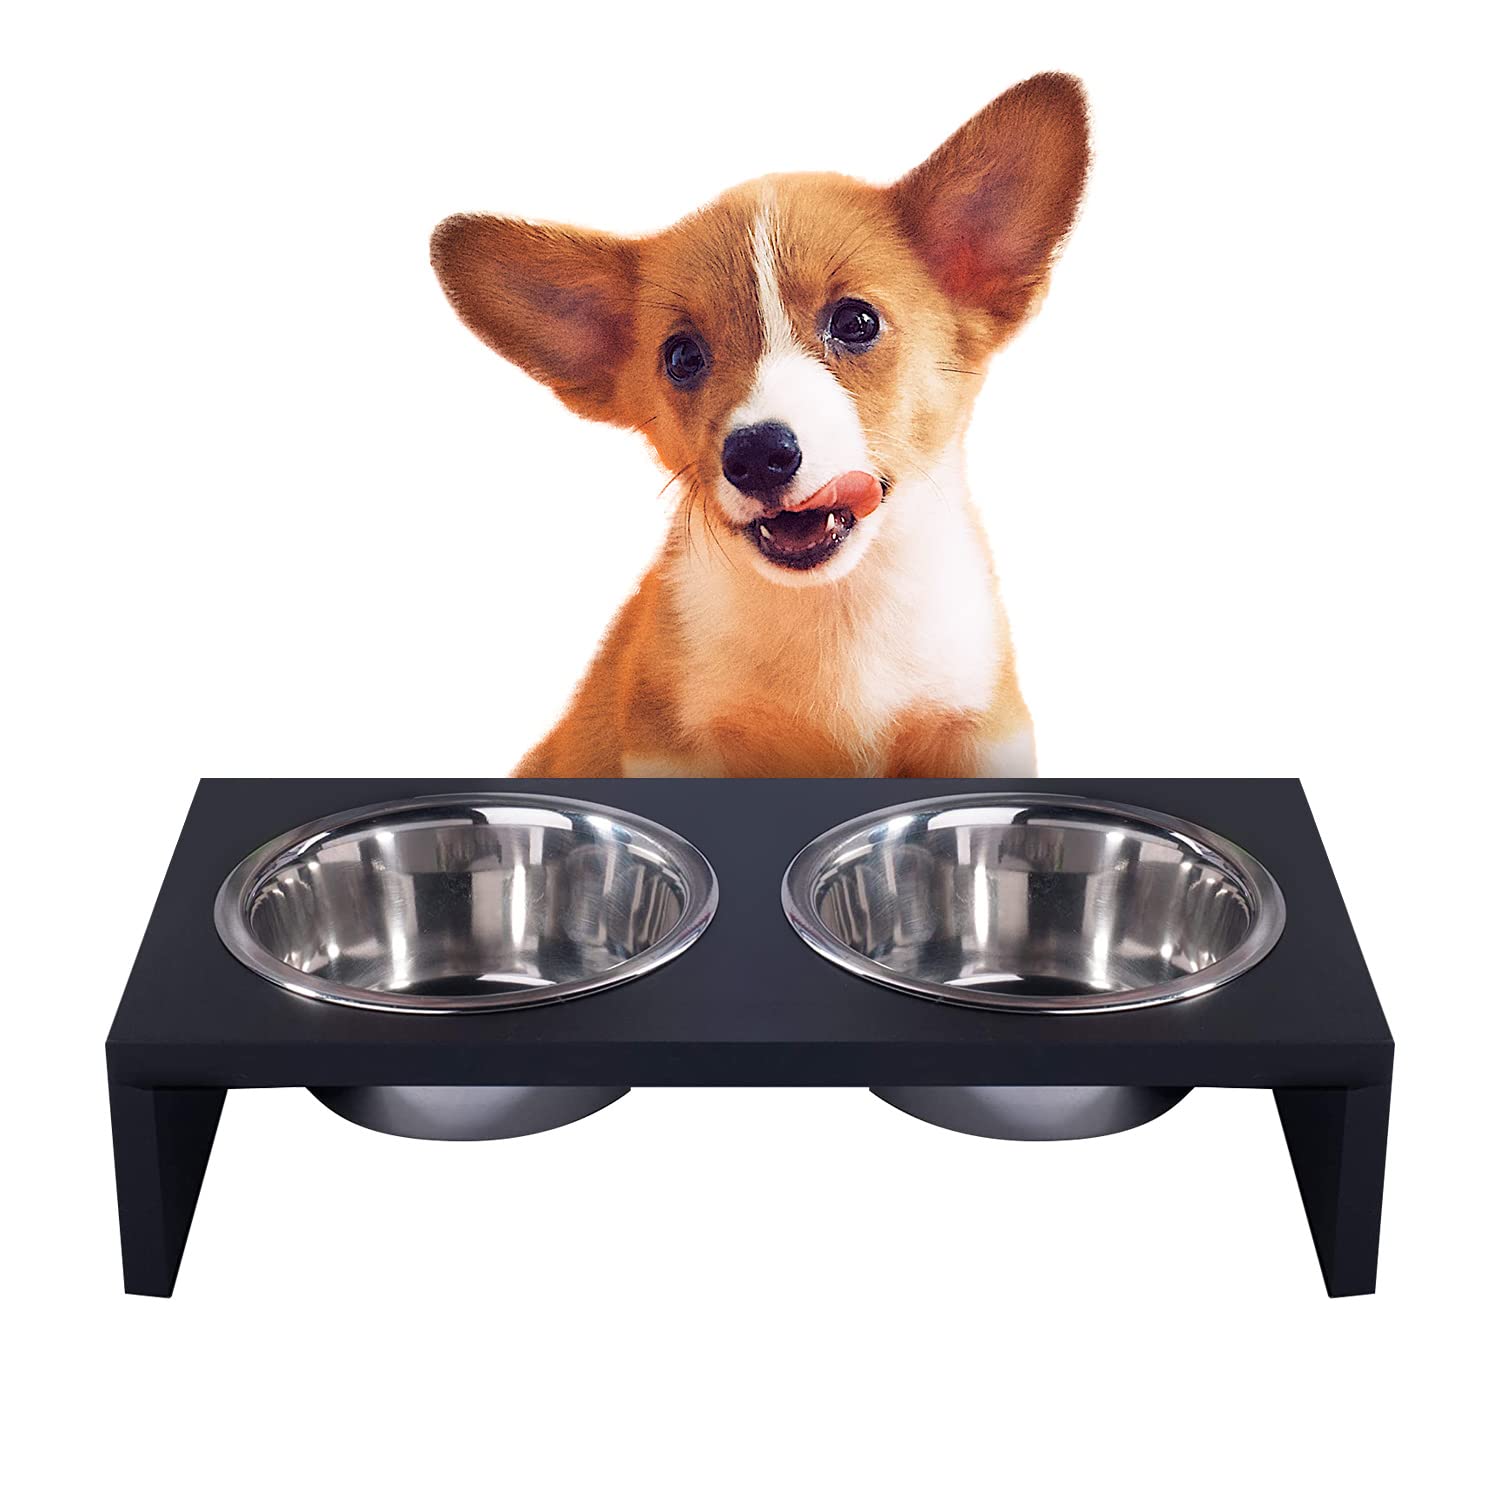 PAWISE Elevated Dog Bowls, Raised Cat Feeder Elevated Food and